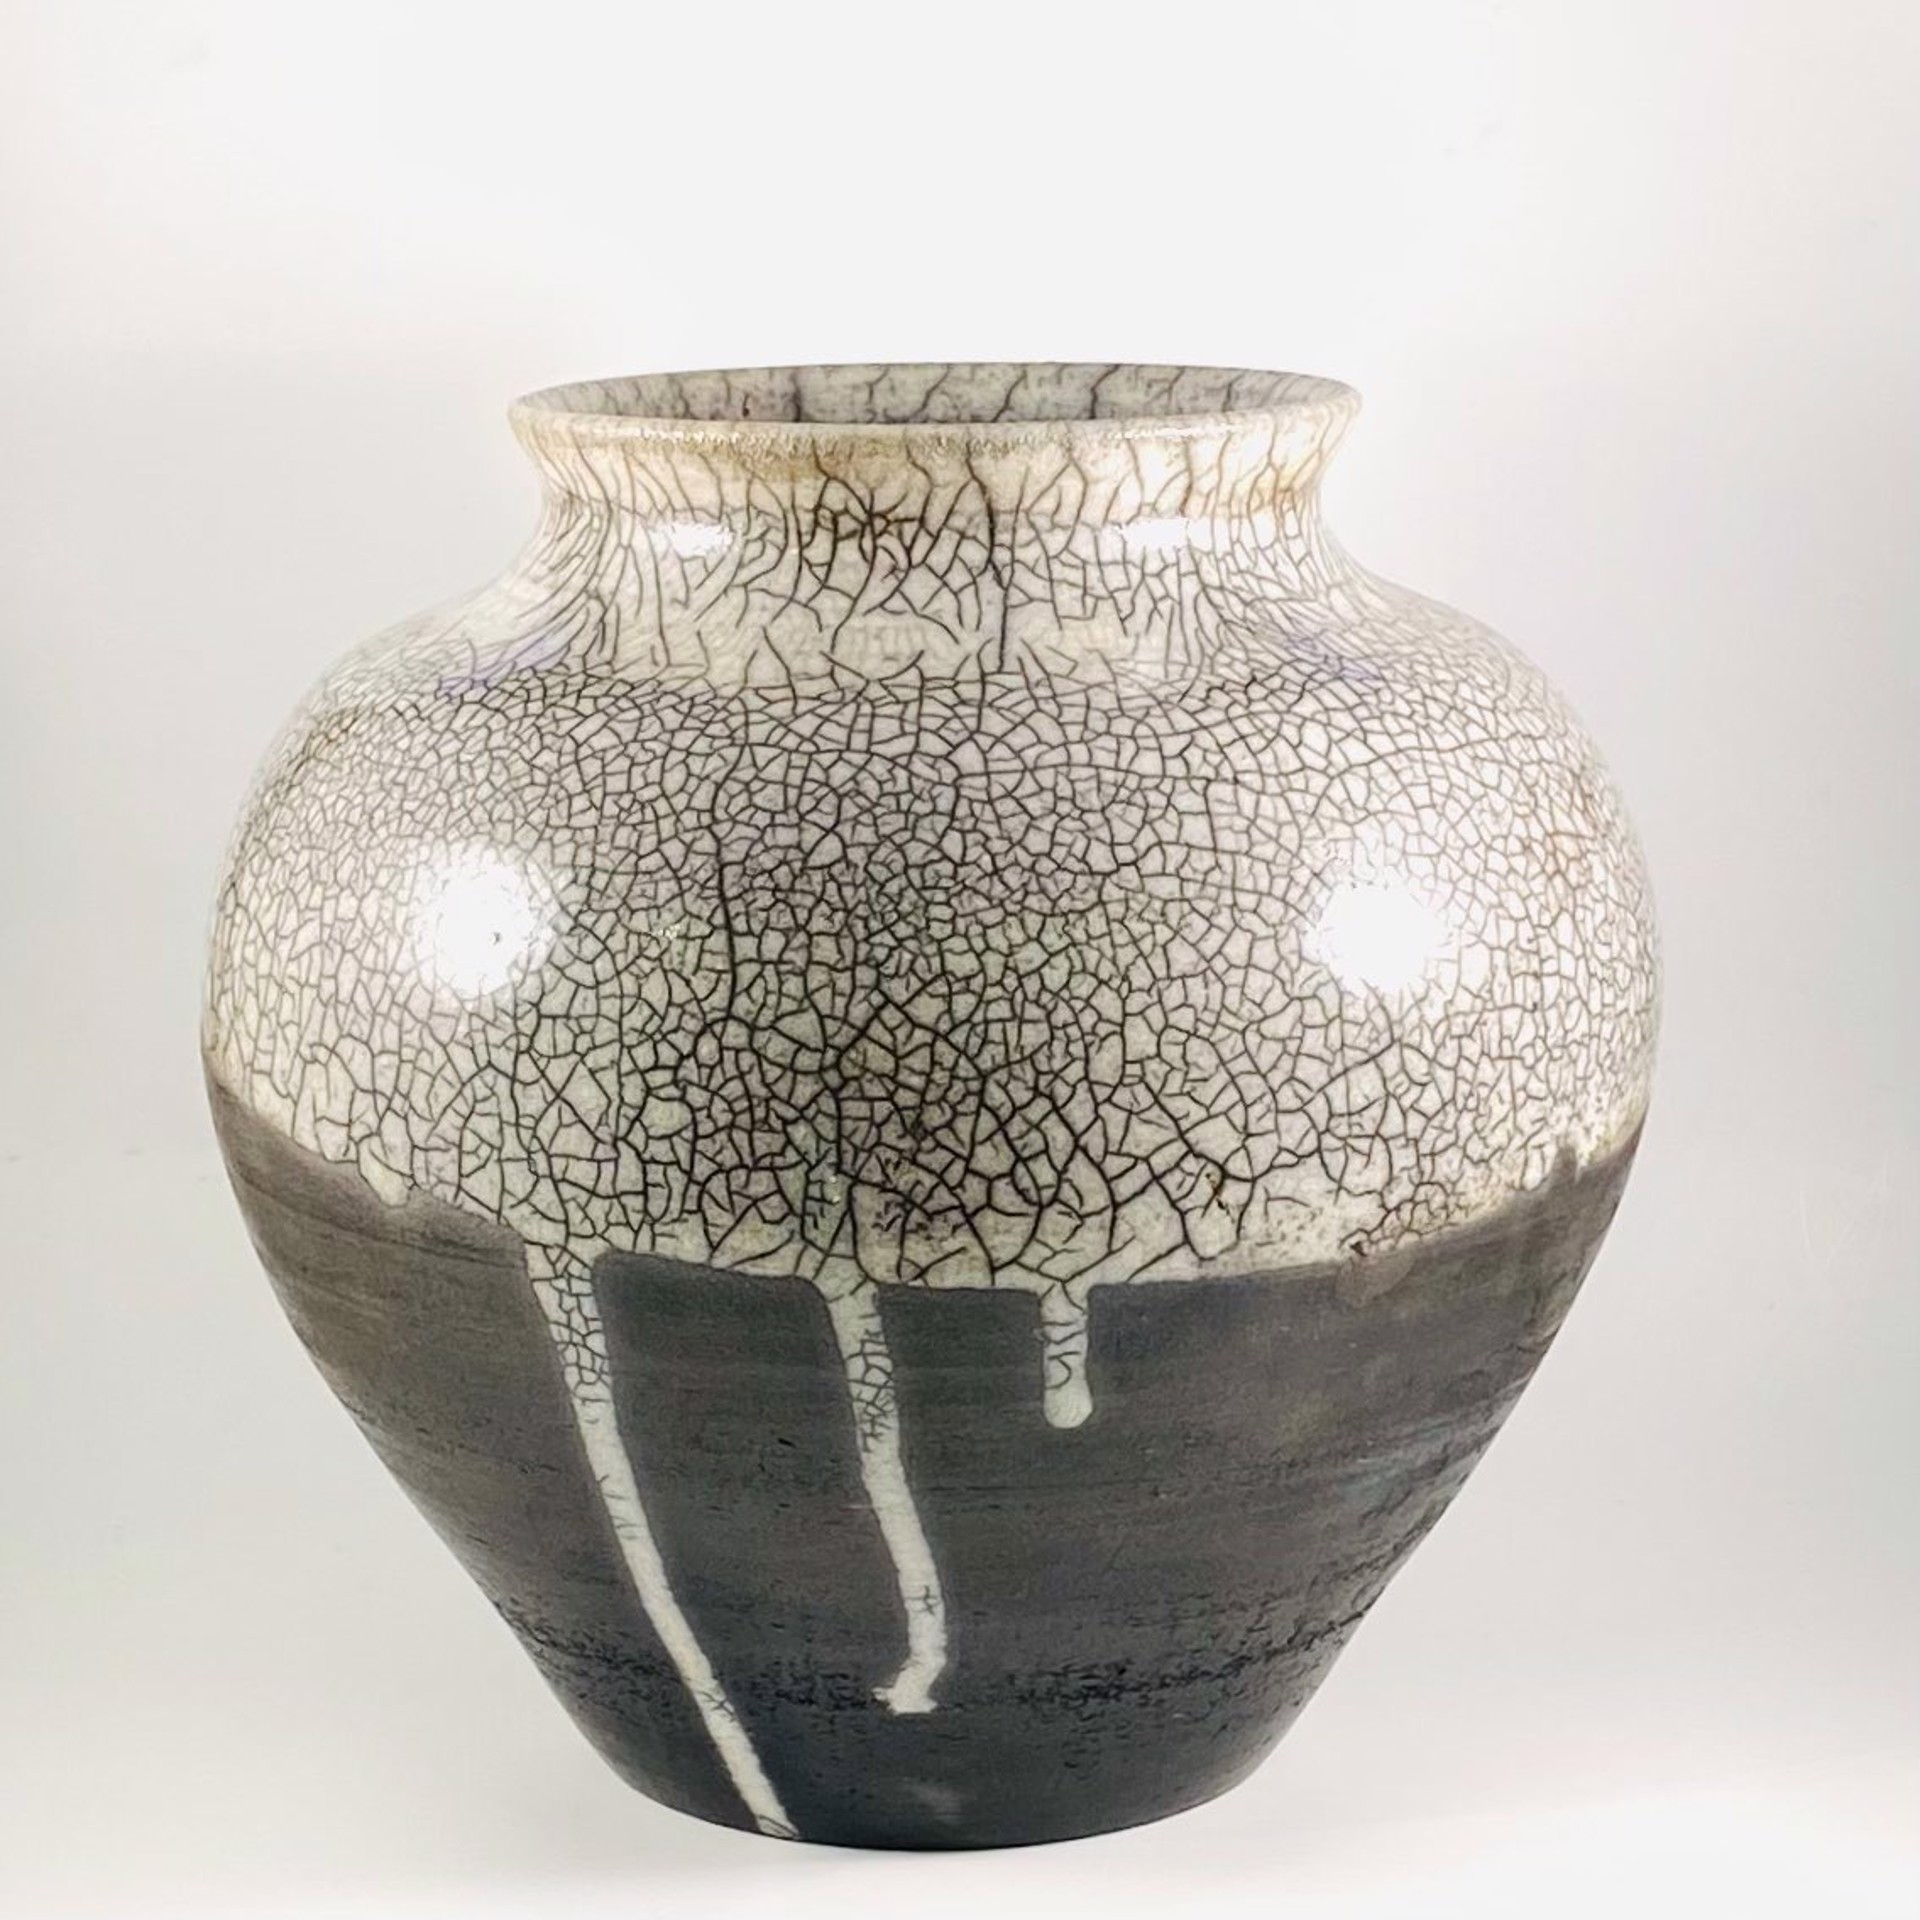 Large Black and White Crackle Drip Vase SB21-11 by Silas Bradley